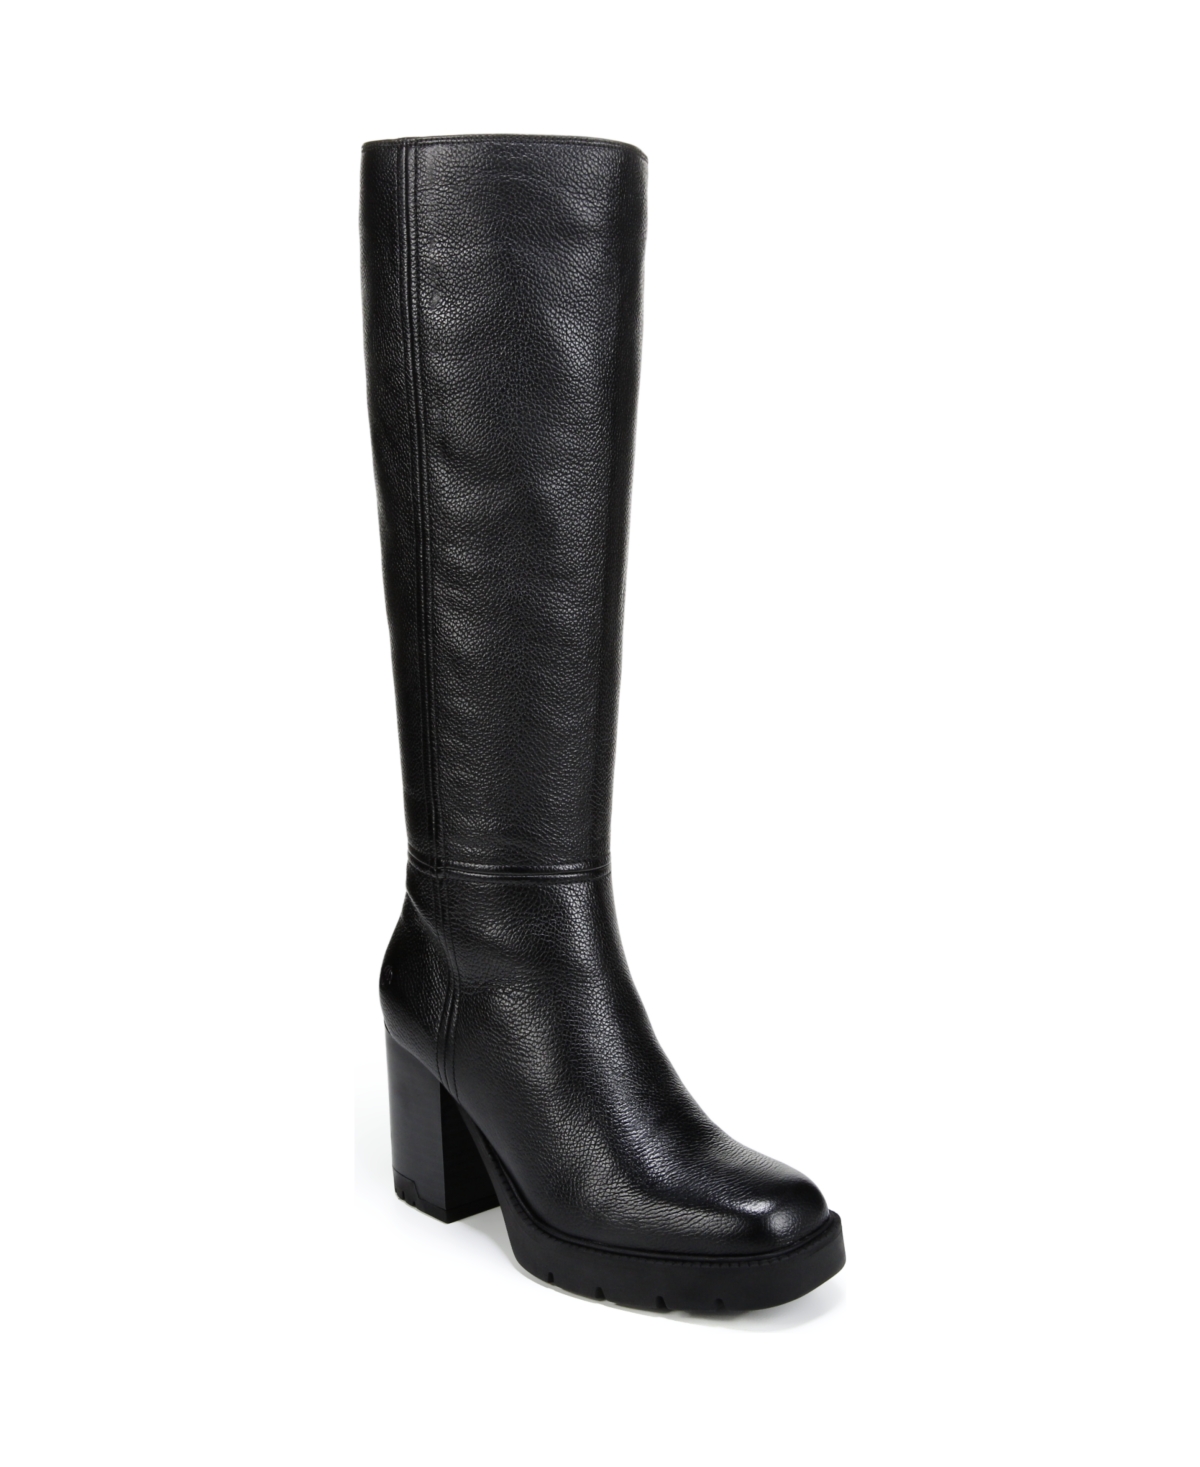 NATURALIZER WILLOW LUG SOLE TALL BOOTS